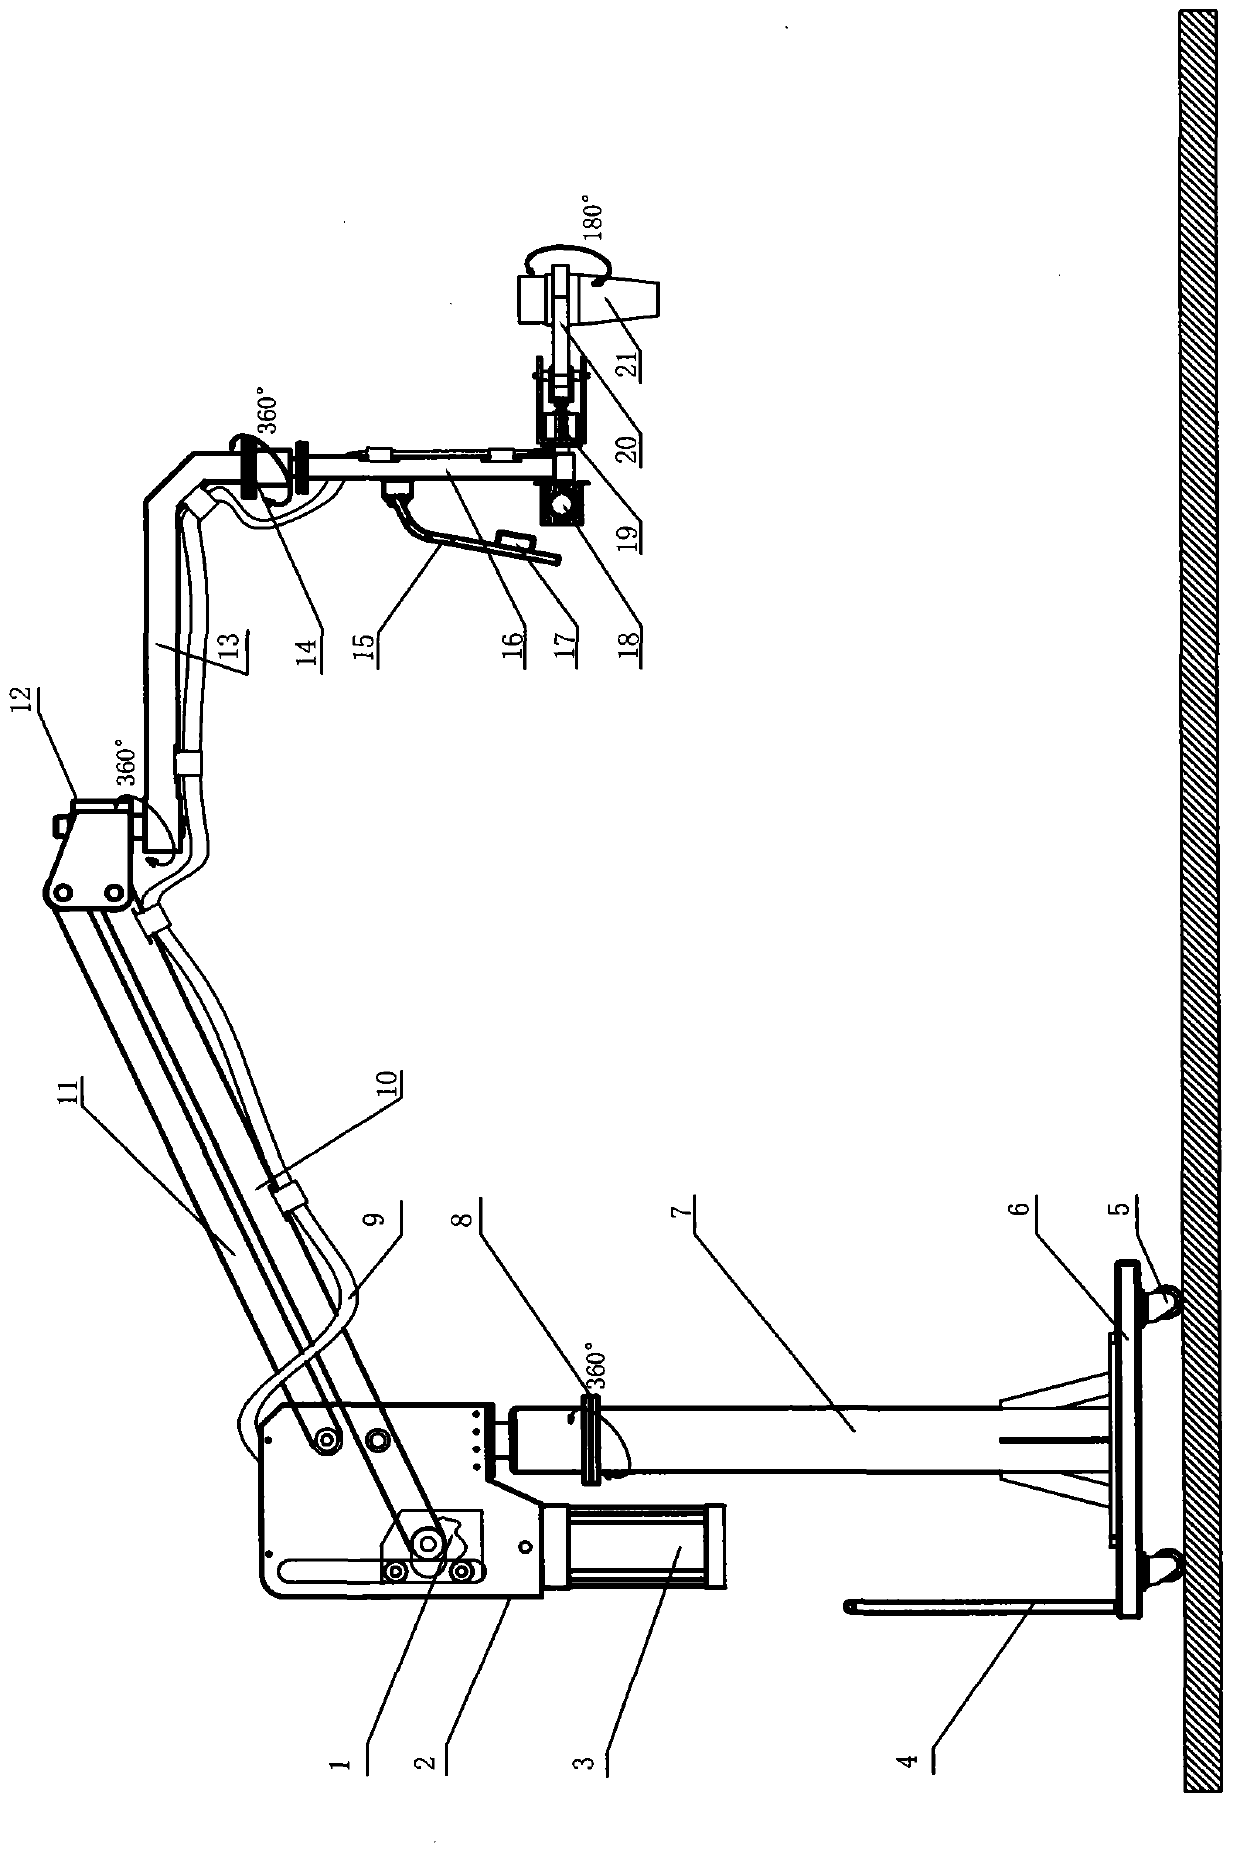 Constant pressure control assisted manipulator